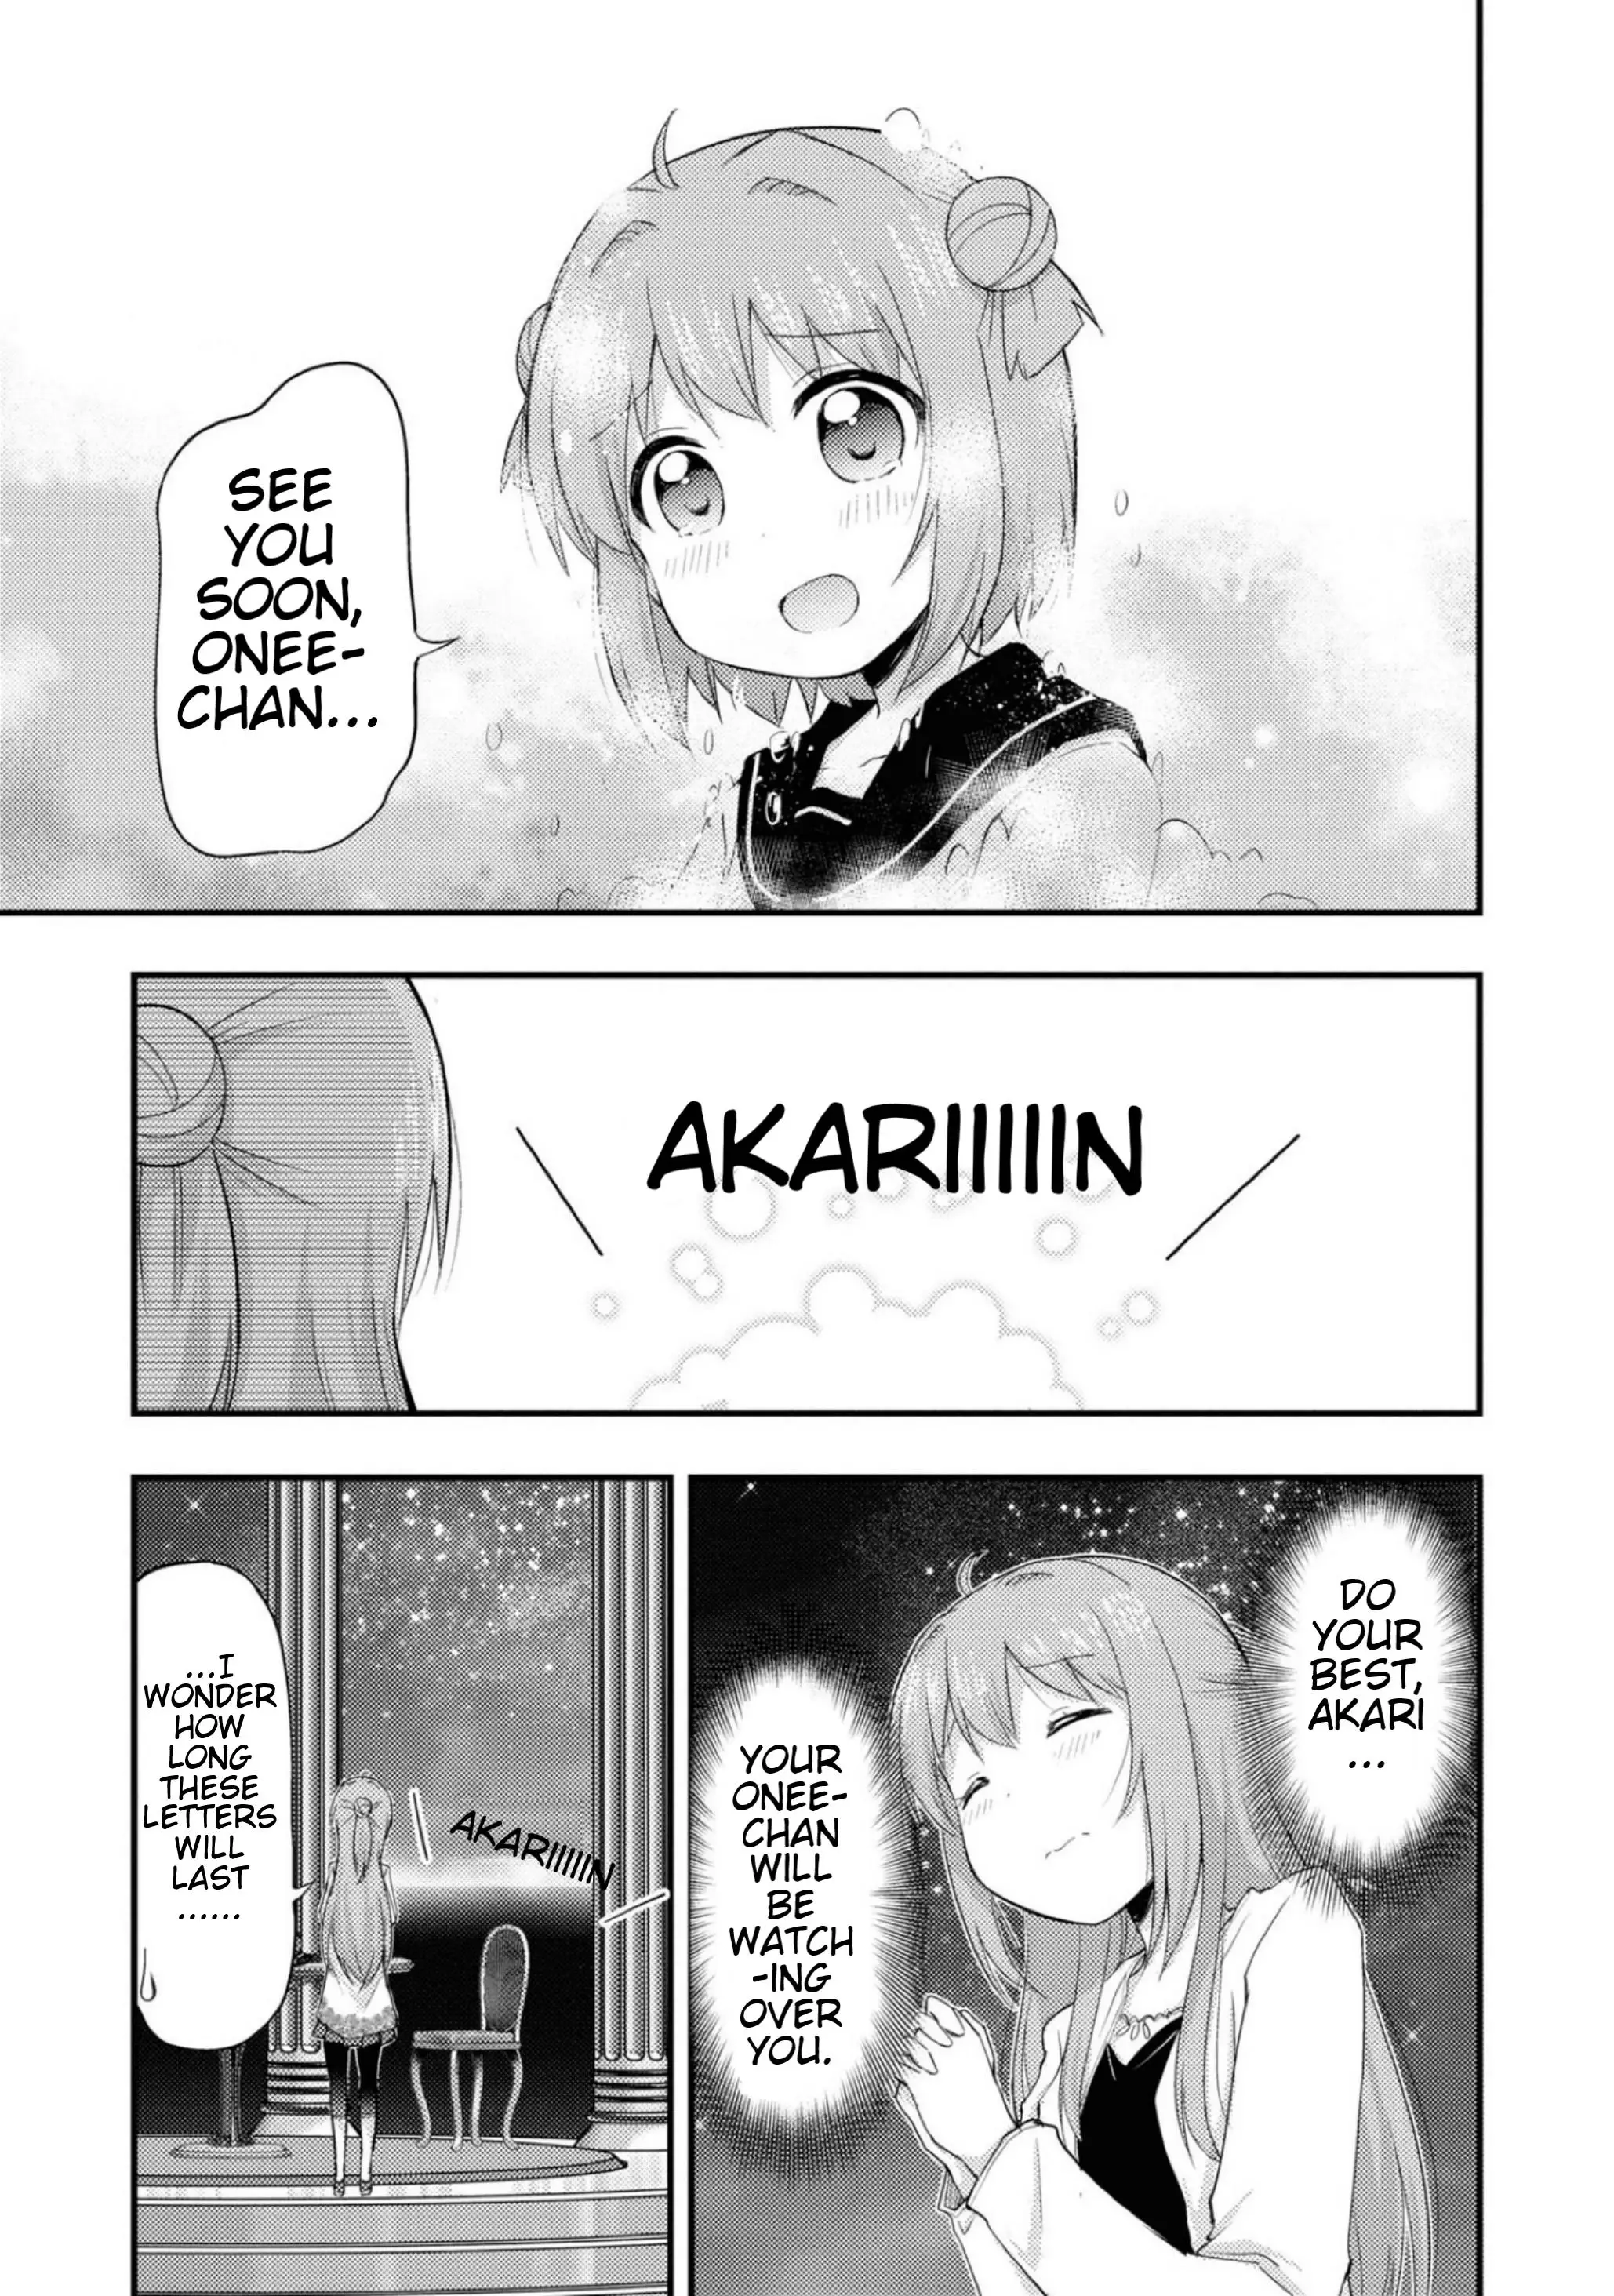 That Time Only Akari Got Reincarnated As A Slime - 13 page 9-9bd65eab